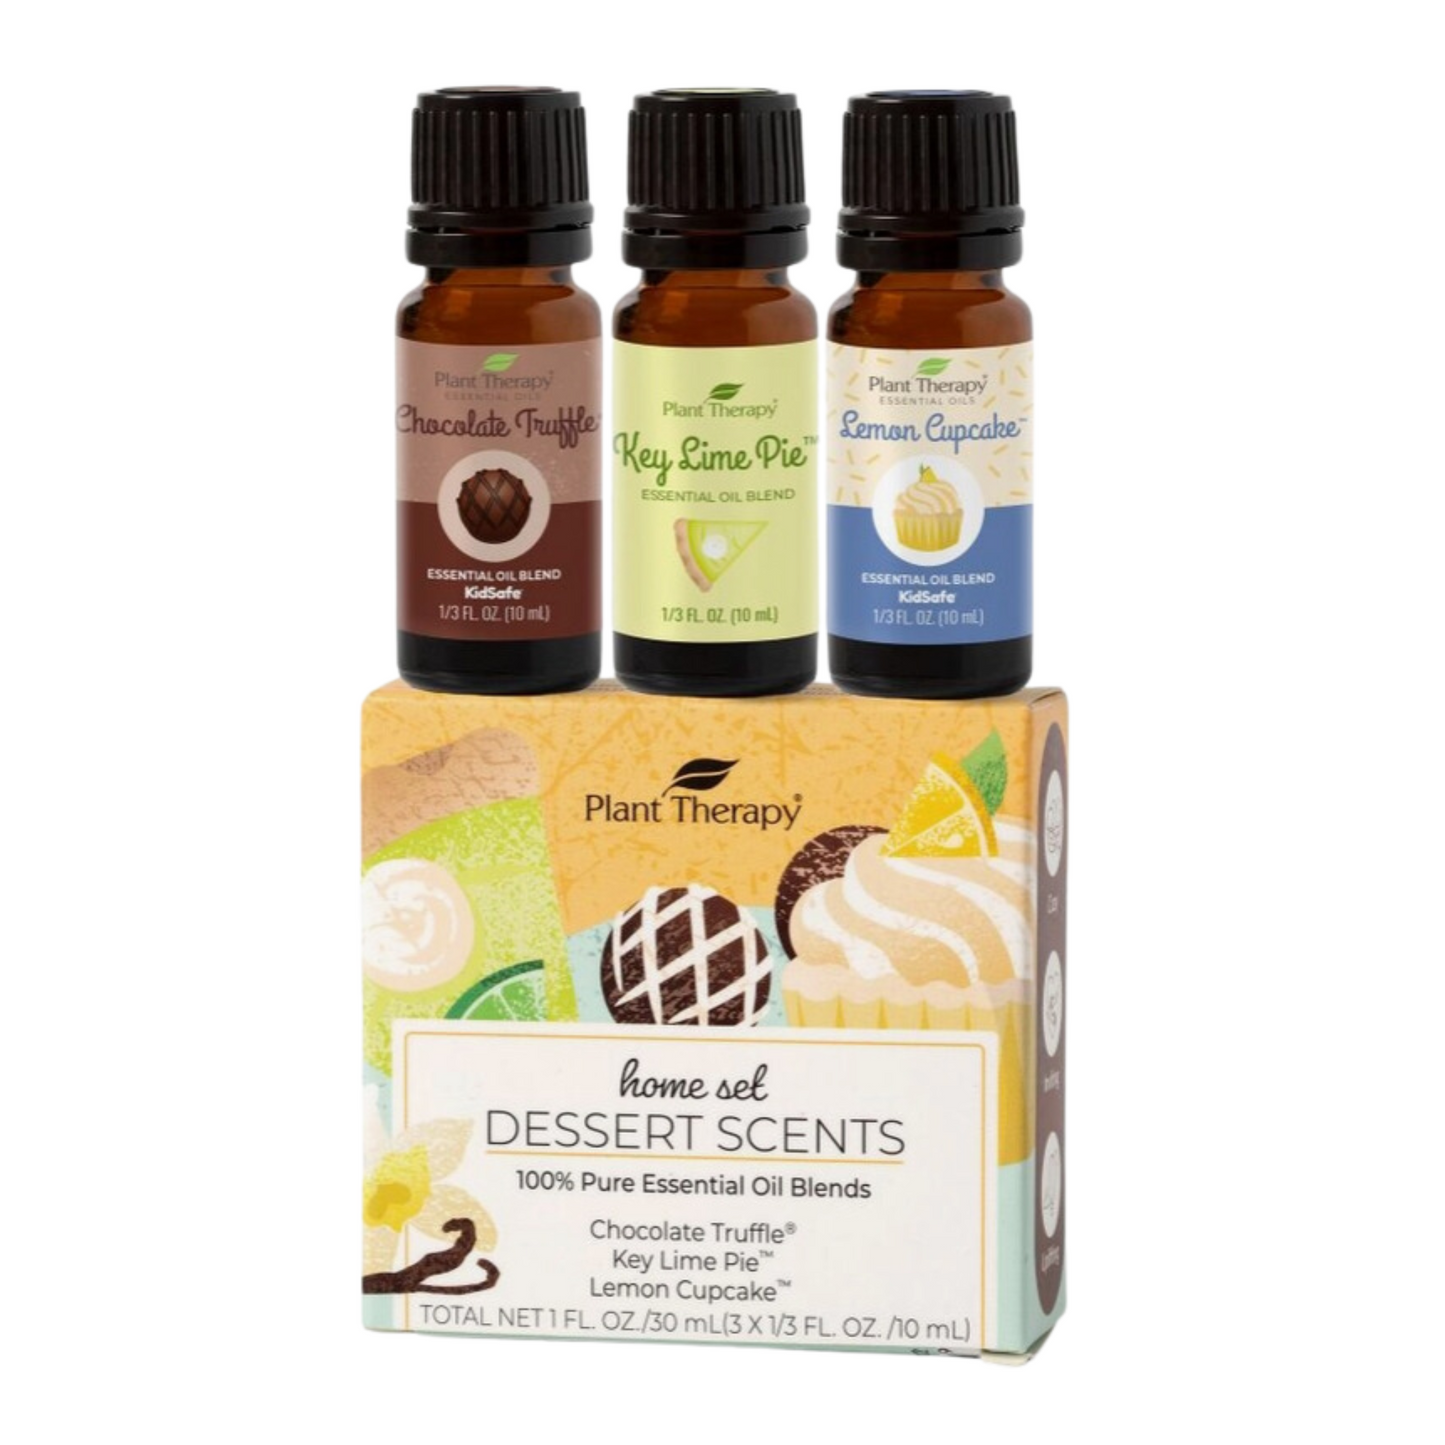 Plant Therapy Essential Oil Dessert Scents Home Set